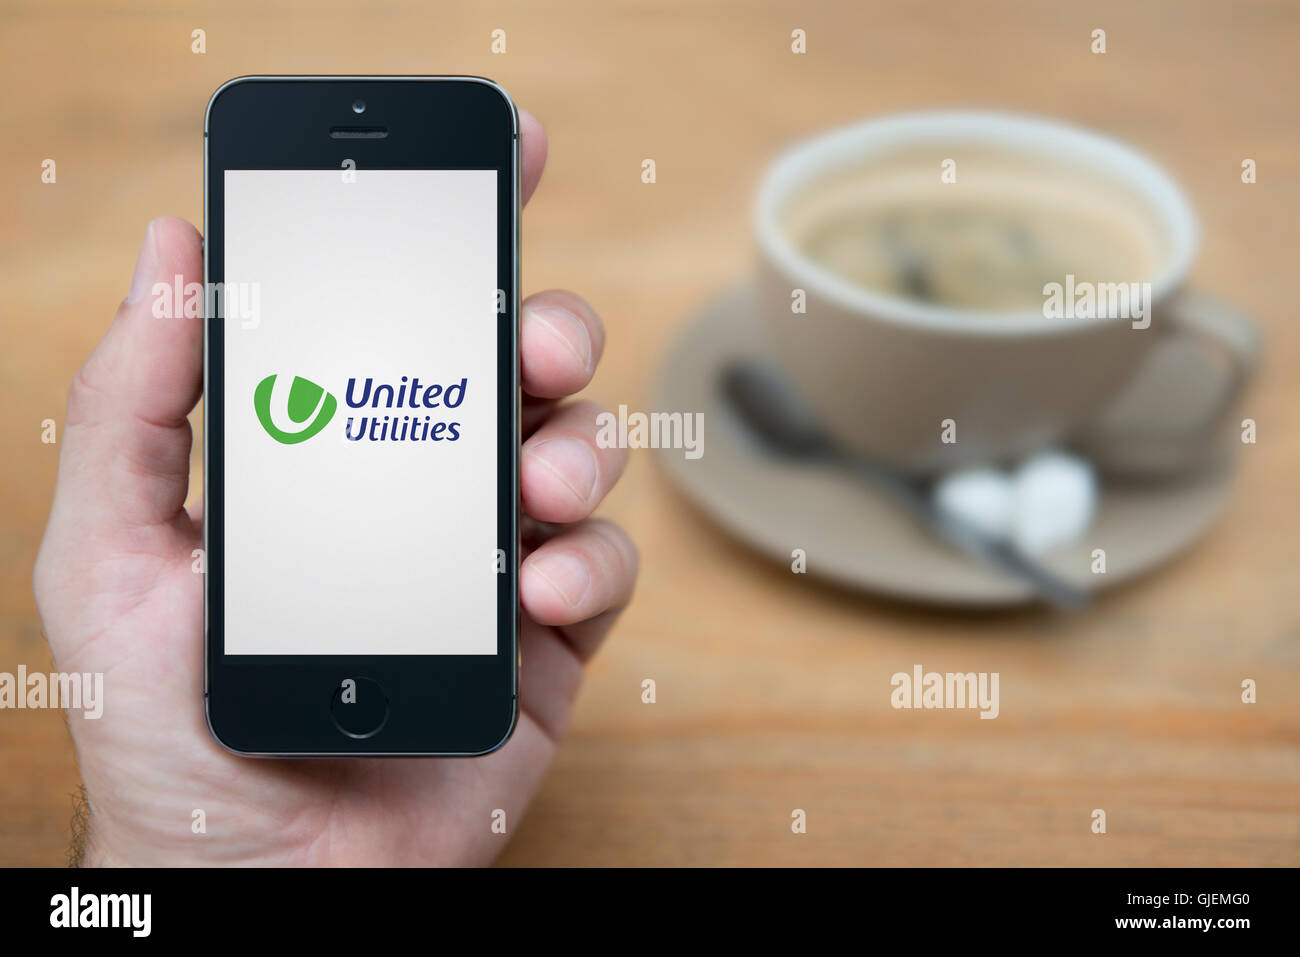 A man looks at his iPhone which displays the United Utilities logo, while sat with a cup of coffee (Editorial use only). Stock Photo